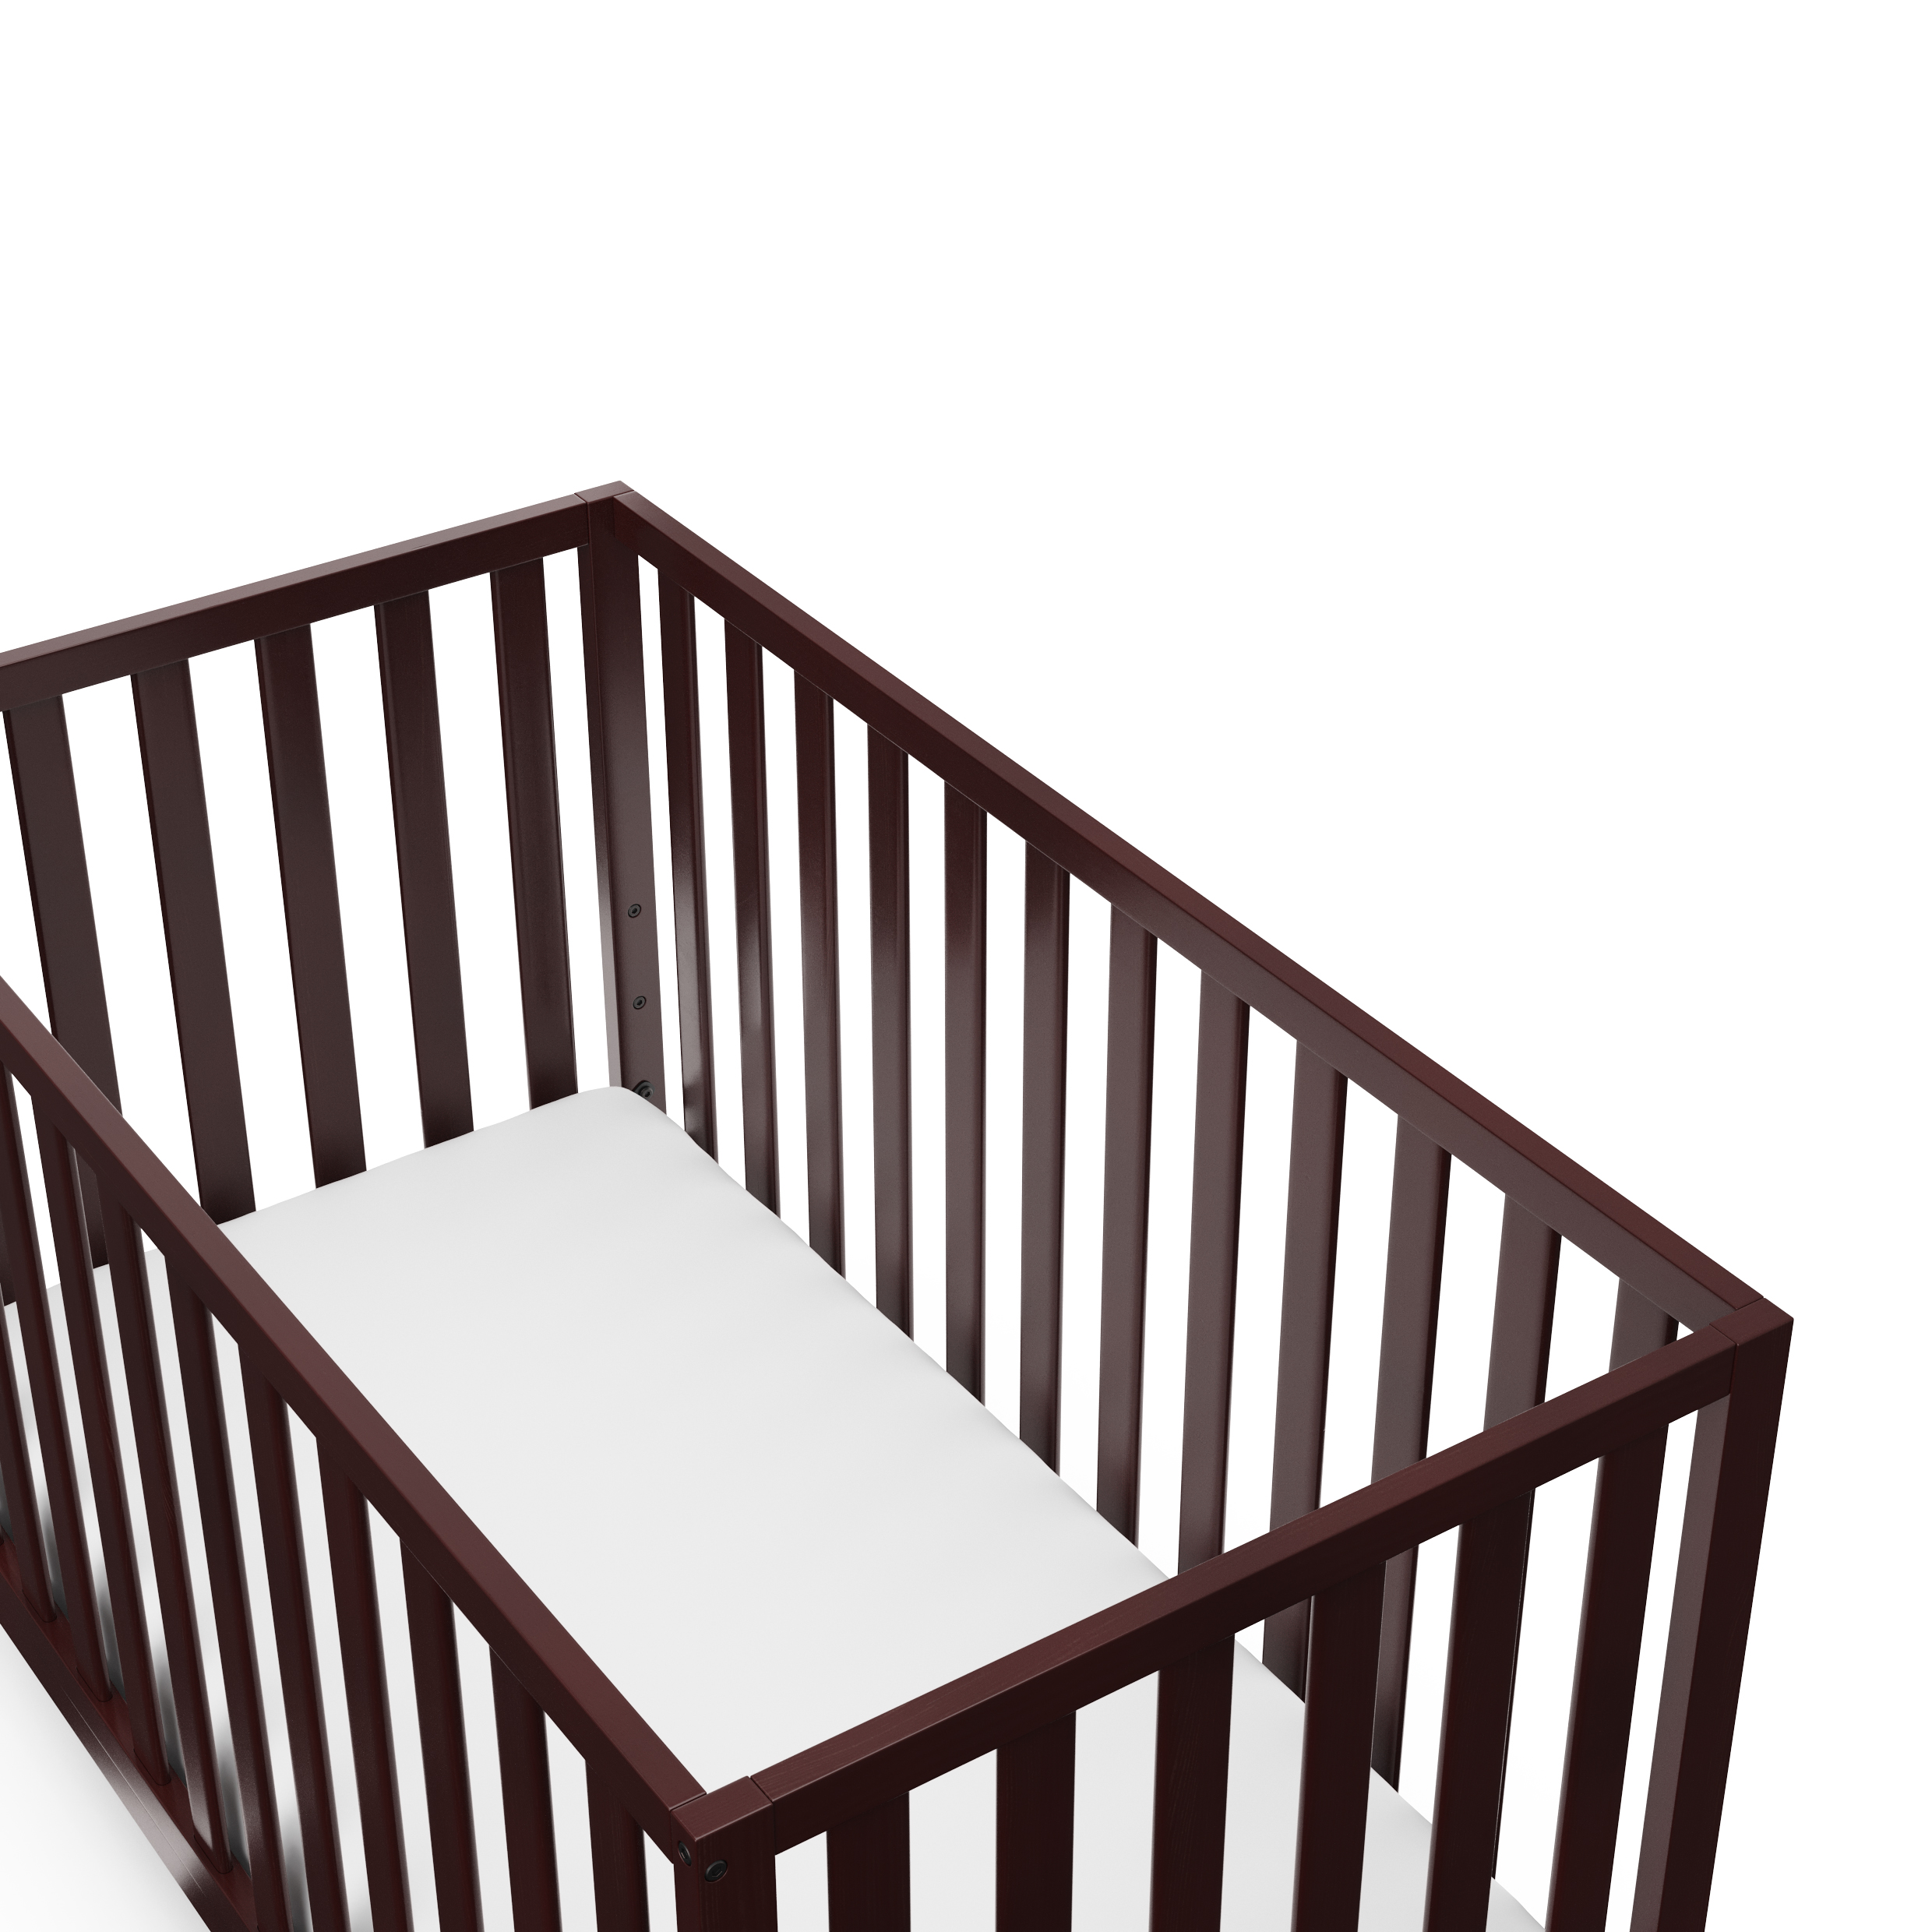 Storkcraft Sunset 4-in-1 Convertible Baby Crib, Espresso - image 5 of 8